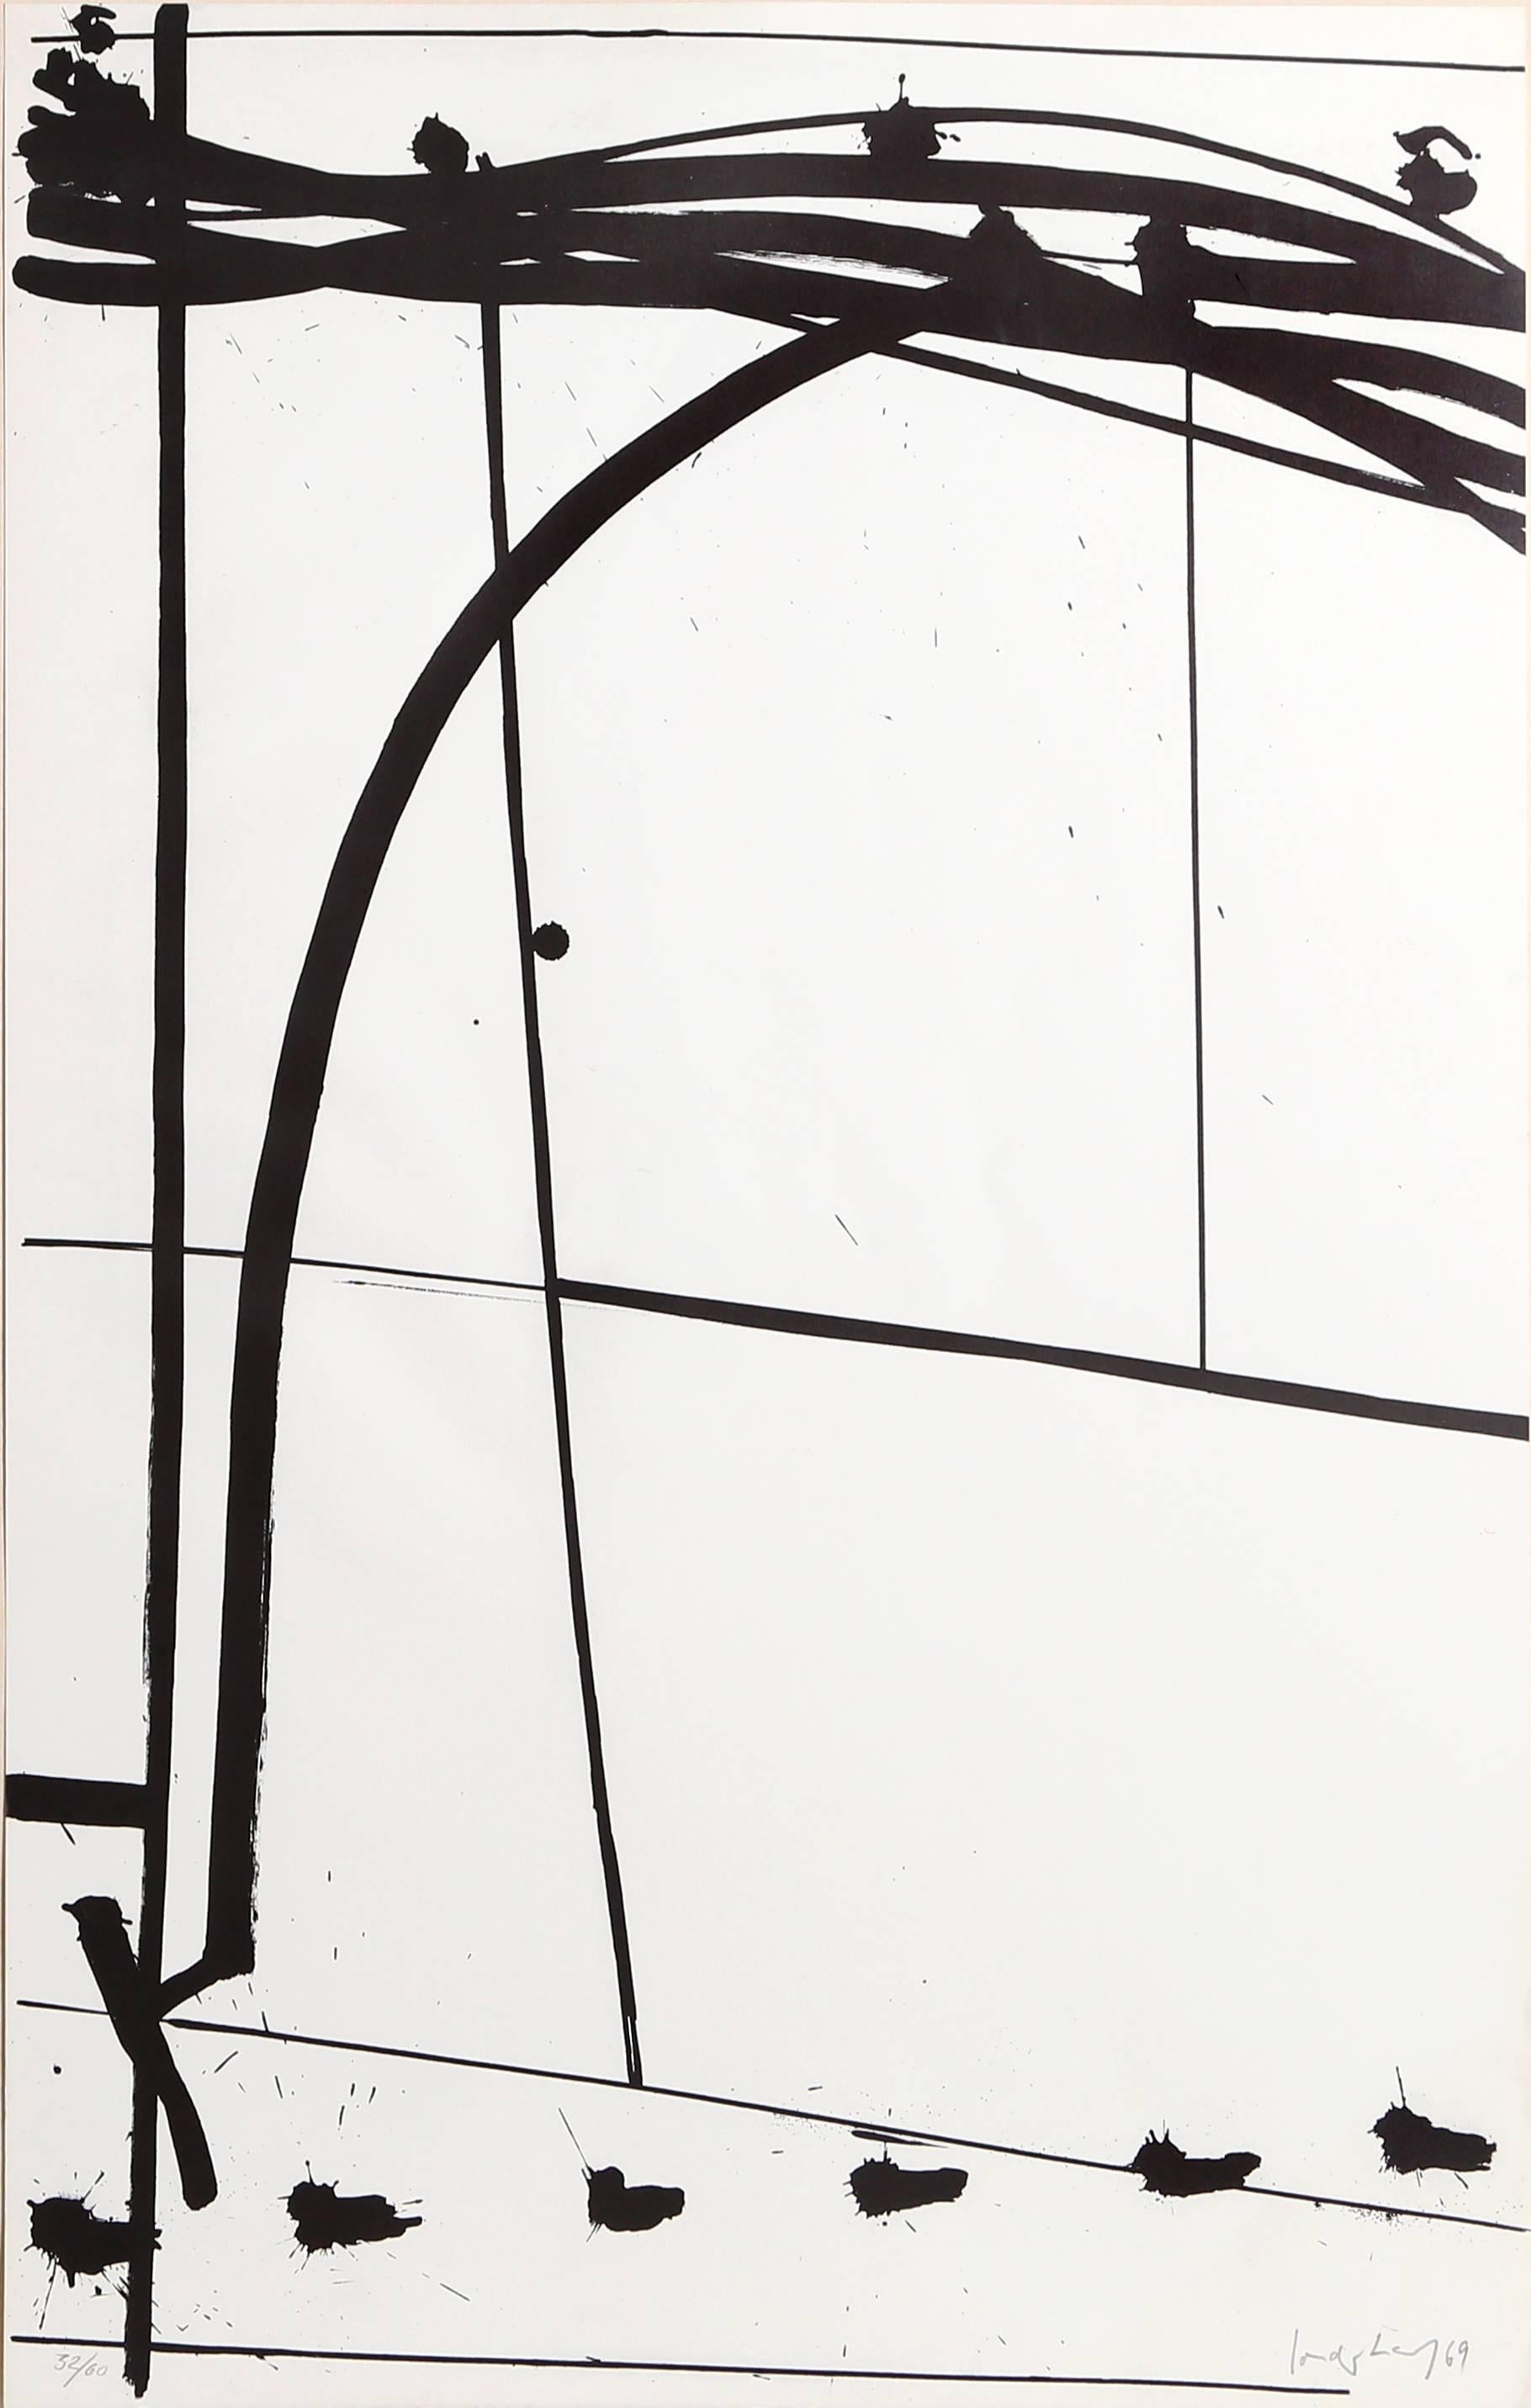 Untitled 3, Abstract Lithograph by K.R.H. Sonderborg